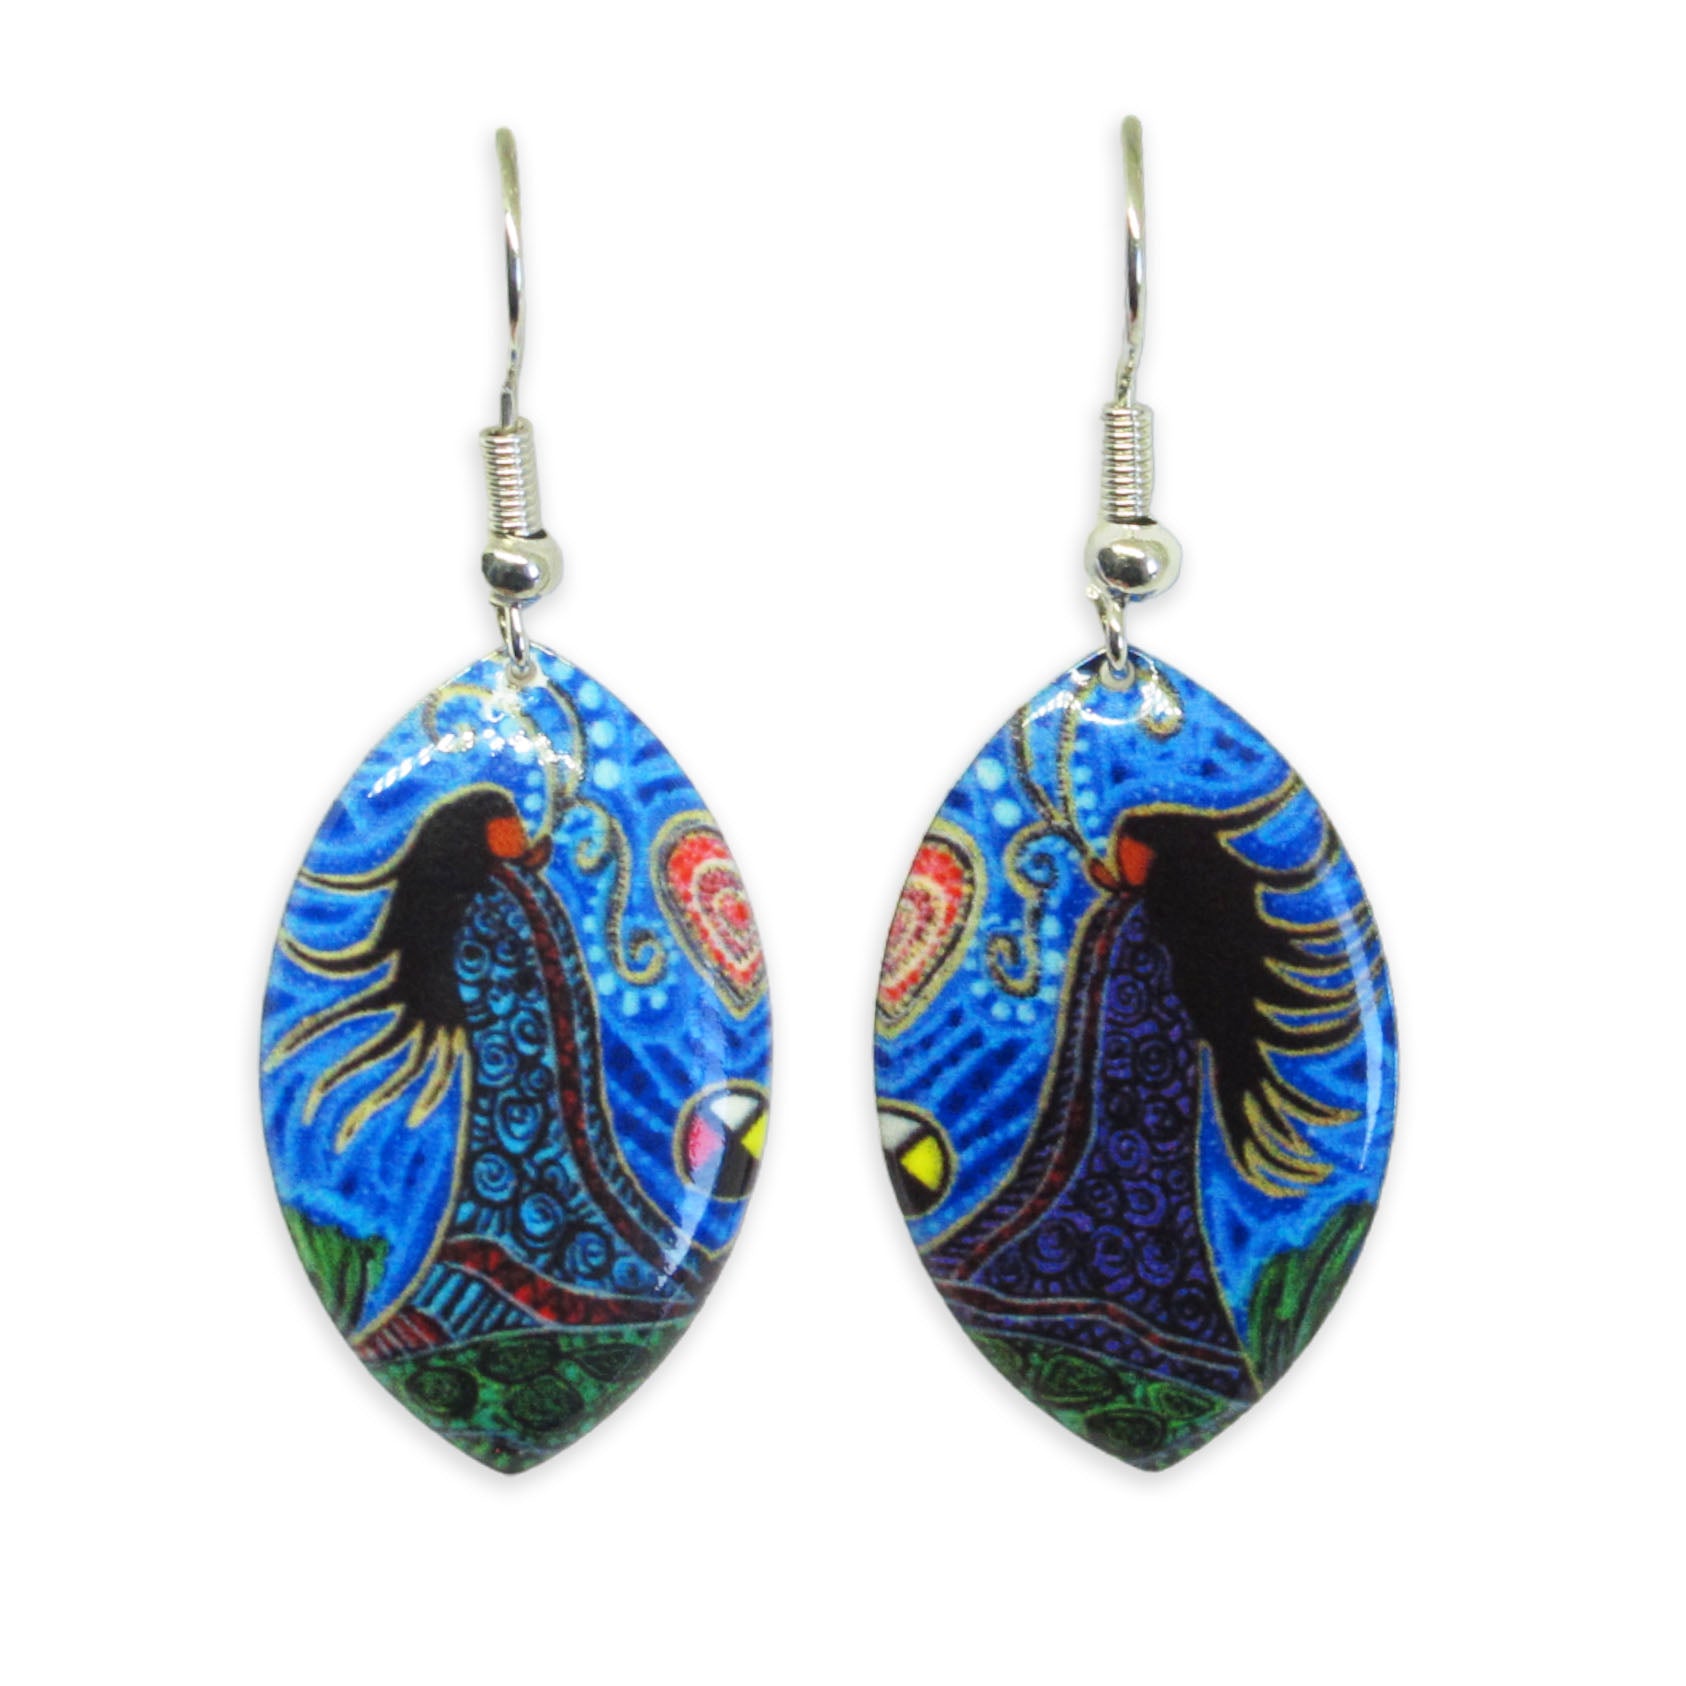 Leah Dorion Breath of Life Gallery Collection Earrings